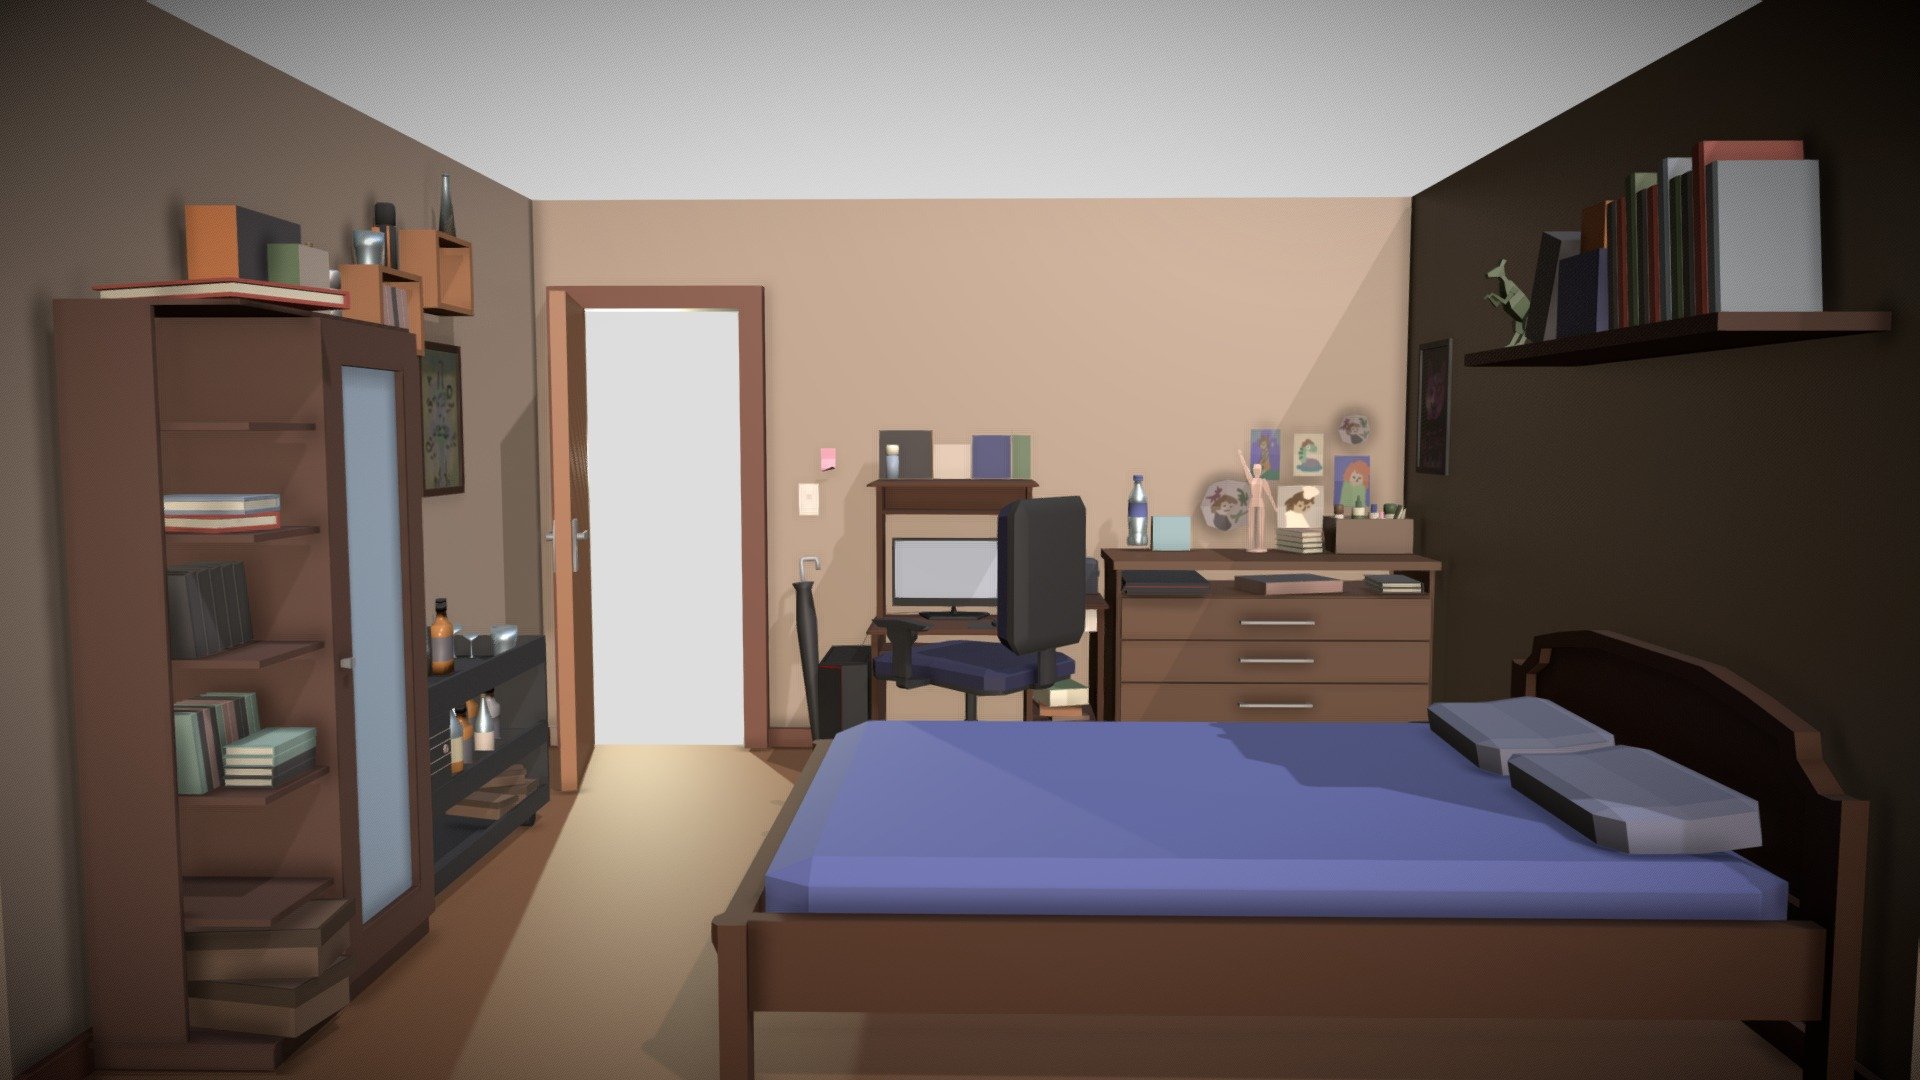 A lowpoly-esque render of my bedroom.
This is one of the first personal projects that I make so I guess there's a lot of room for improvement 3d model